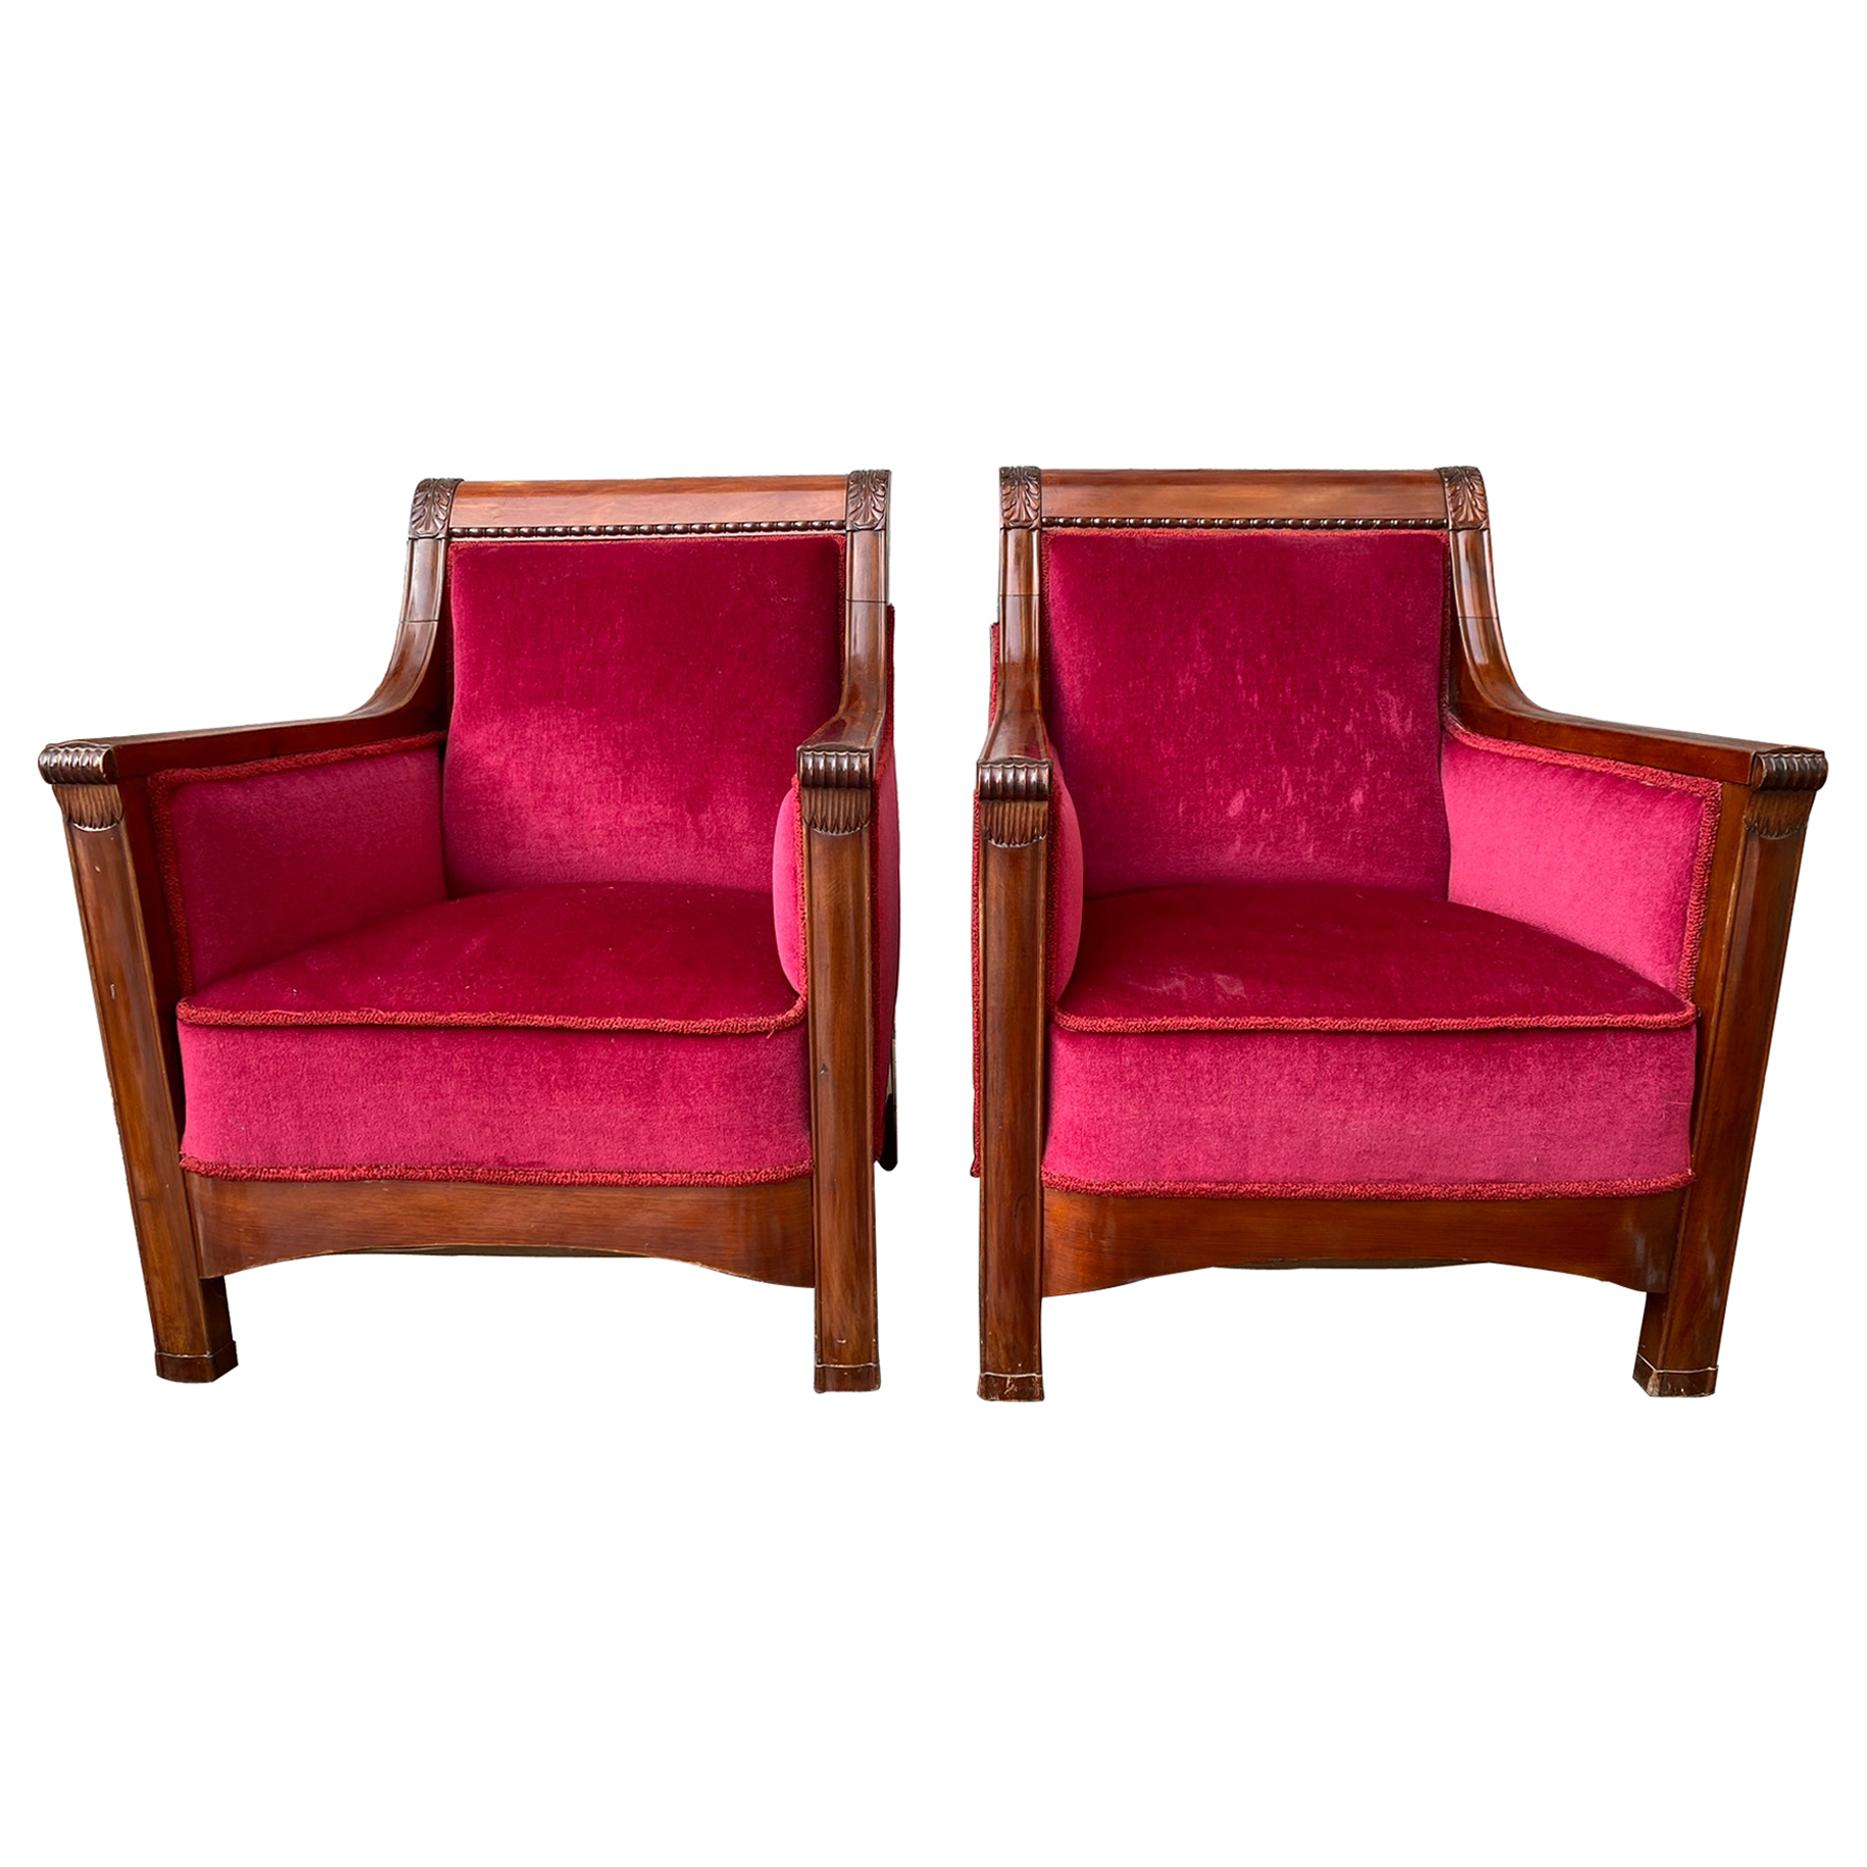 Pair of Large Swedish Jugend Mahogany Armchairs in Red Velvet Fabric